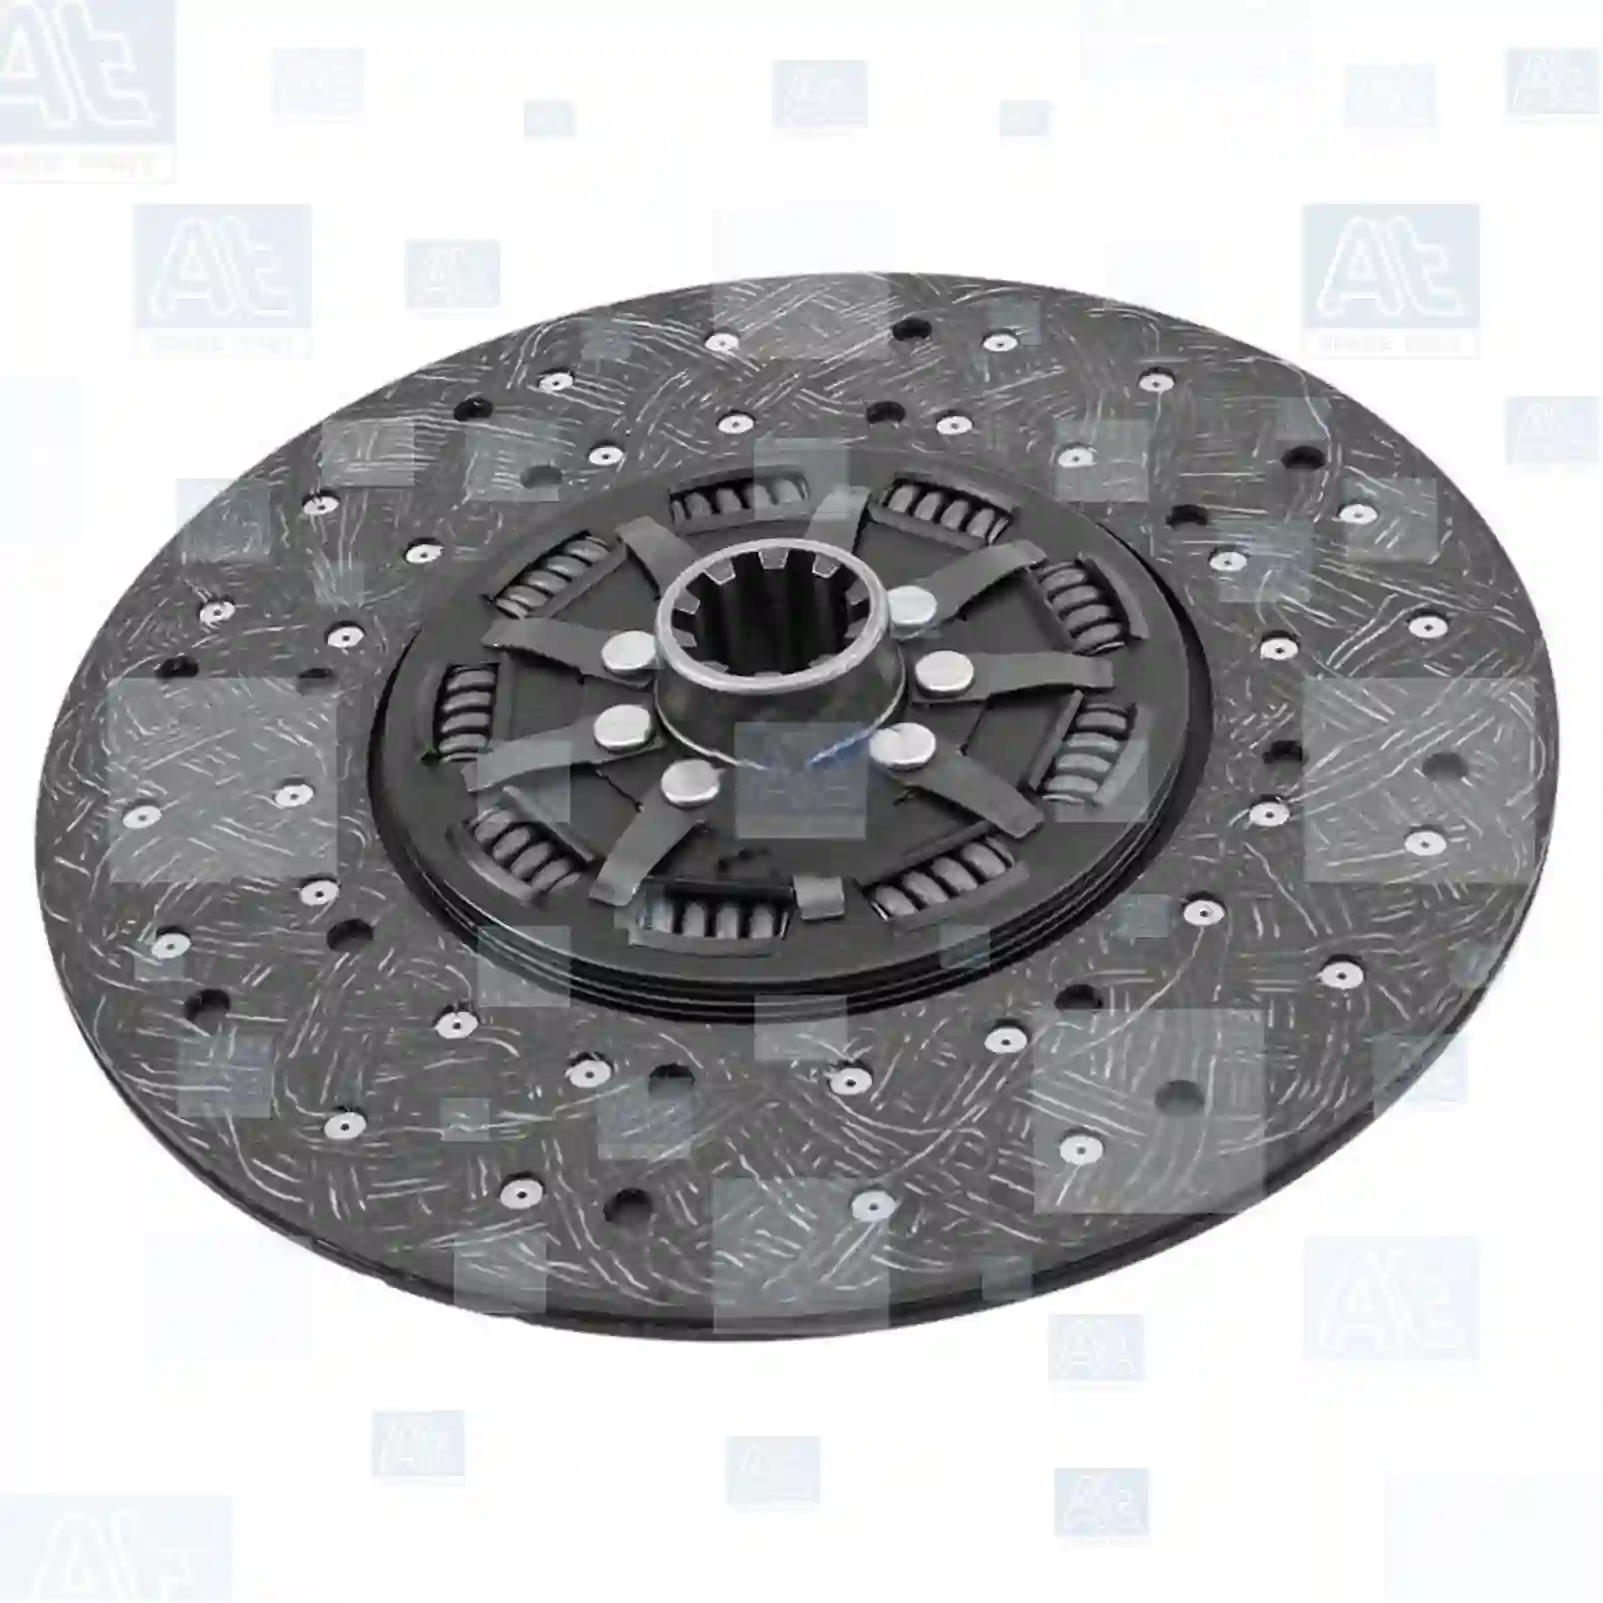 Clutch disc, at no 77722059, oem no: 0252683, 0740794, 0740794A, 0740794R, 252683, 362743, 373895, 623212, 740794, 740794A, 740794R, 96001, 96001A, 96001R, 42102155, 00112590, 01903854, 01903860, 01903953, 01903954, 42102155, 503134208, 0032505603, 0032506203, 0042507303, 0052501903, 0052502403, 0052503903, 0052504003, 0072503003, 0072507403, 007250740380, 0082504603, 0122506703, 0132505703, 0182503703, 0212500503, 8383276000, 011009733, 040111301, 8383276000 At Spare Part | Engine, Accelerator Pedal, Camshaft, Connecting Rod, Crankcase, Crankshaft, Cylinder Head, Engine Suspension Mountings, Exhaust Manifold, Exhaust Gas Recirculation, Filter Kits, Flywheel Housing, General Overhaul Kits, Engine, Intake Manifold, Oil Cleaner, Oil Cooler, Oil Filter, Oil Pump, Oil Sump, Piston & Liner, Sensor & Switch, Timing Case, Turbocharger, Cooling System, Belt Tensioner, Coolant Filter, Coolant Pipe, Corrosion Prevention Agent, Drive, Expansion Tank, Fan, Intercooler, Monitors & Gauges, Radiator, Thermostat, V-Belt / Timing belt, Water Pump, Fuel System, Electronical Injector Unit, Feed Pump, Fuel Filter, cpl., Fuel Gauge Sender,  Fuel Line, Fuel Pump, Fuel Tank, Injection Line Kit, Injection Pump, Exhaust System, Clutch & Pedal, Gearbox, Propeller Shaft, Axles, Brake System, Hubs & Wheels, Suspension, Leaf Spring, Universal Parts / Accessories, Steering, Electrical System, Cabin Clutch disc, at no 77722059, oem no: 0252683, 0740794, 0740794A, 0740794R, 252683, 362743, 373895, 623212, 740794, 740794A, 740794R, 96001, 96001A, 96001R, 42102155, 00112590, 01903854, 01903860, 01903953, 01903954, 42102155, 503134208, 0032505603, 0032506203, 0042507303, 0052501903, 0052502403, 0052503903, 0052504003, 0072503003, 0072507403, 007250740380, 0082504603, 0122506703, 0132505703, 0182503703, 0212500503, 8383276000, 011009733, 040111301, 8383276000 At Spare Part | Engine, Accelerator Pedal, Camshaft, Connecting Rod, Crankcase, Crankshaft, Cylinder Head, Engine Suspension Mountings, Exhaust Manifold, Exhaust Gas Recirculation, Filter Kits, Flywheel Housing, General Overhaul Kits, Engine, Intake Manifold, Oil Cleaner, Oil Cooler, Oil Filter, Oil Pump, Oil Sump, Piston & Liner, Sensor & Switch, Timing Case, Turbocharger, Cooling System, Belt Tensioner, Coolant Filter, Coolant Pipe, Corrosion Prevention Agent, Drive, Expansion Tank, Fan, Intercooler, Monitors & Gauges, Radiator, Thermostat, V-Belt / Timing belt, Water Pump, Fuel System, Electronical Injector Unit, Feed Pump, Fuel Filter, cpl., Fuel Gauge Sender,  Fuel Line, Fuel Pump, Fuel Tank, Injection Line Kit, Injection Pump, Exhaust System, Clutch & Pedal, Gearbox, Propeller Shaft, Axles, Brake System, Hubs & Wheels, Suspension, Leaf Spring, Universal Parts / Accessories, Steering, Electrical System, Cabin